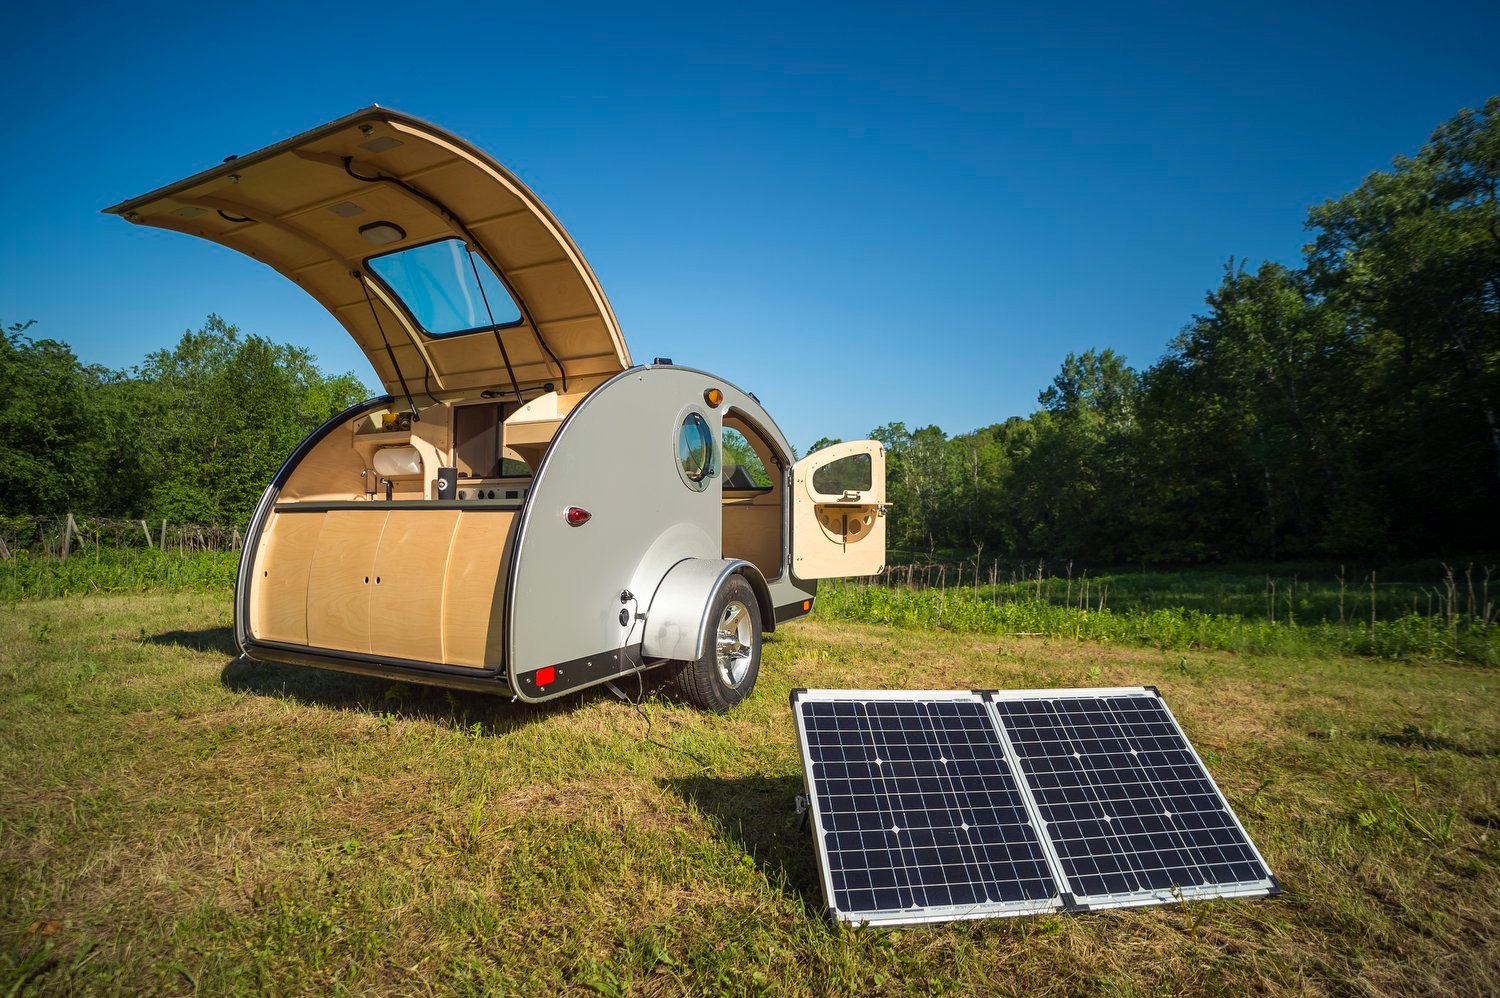 5 Things To Know About Solar-Powered Teardrop Campers